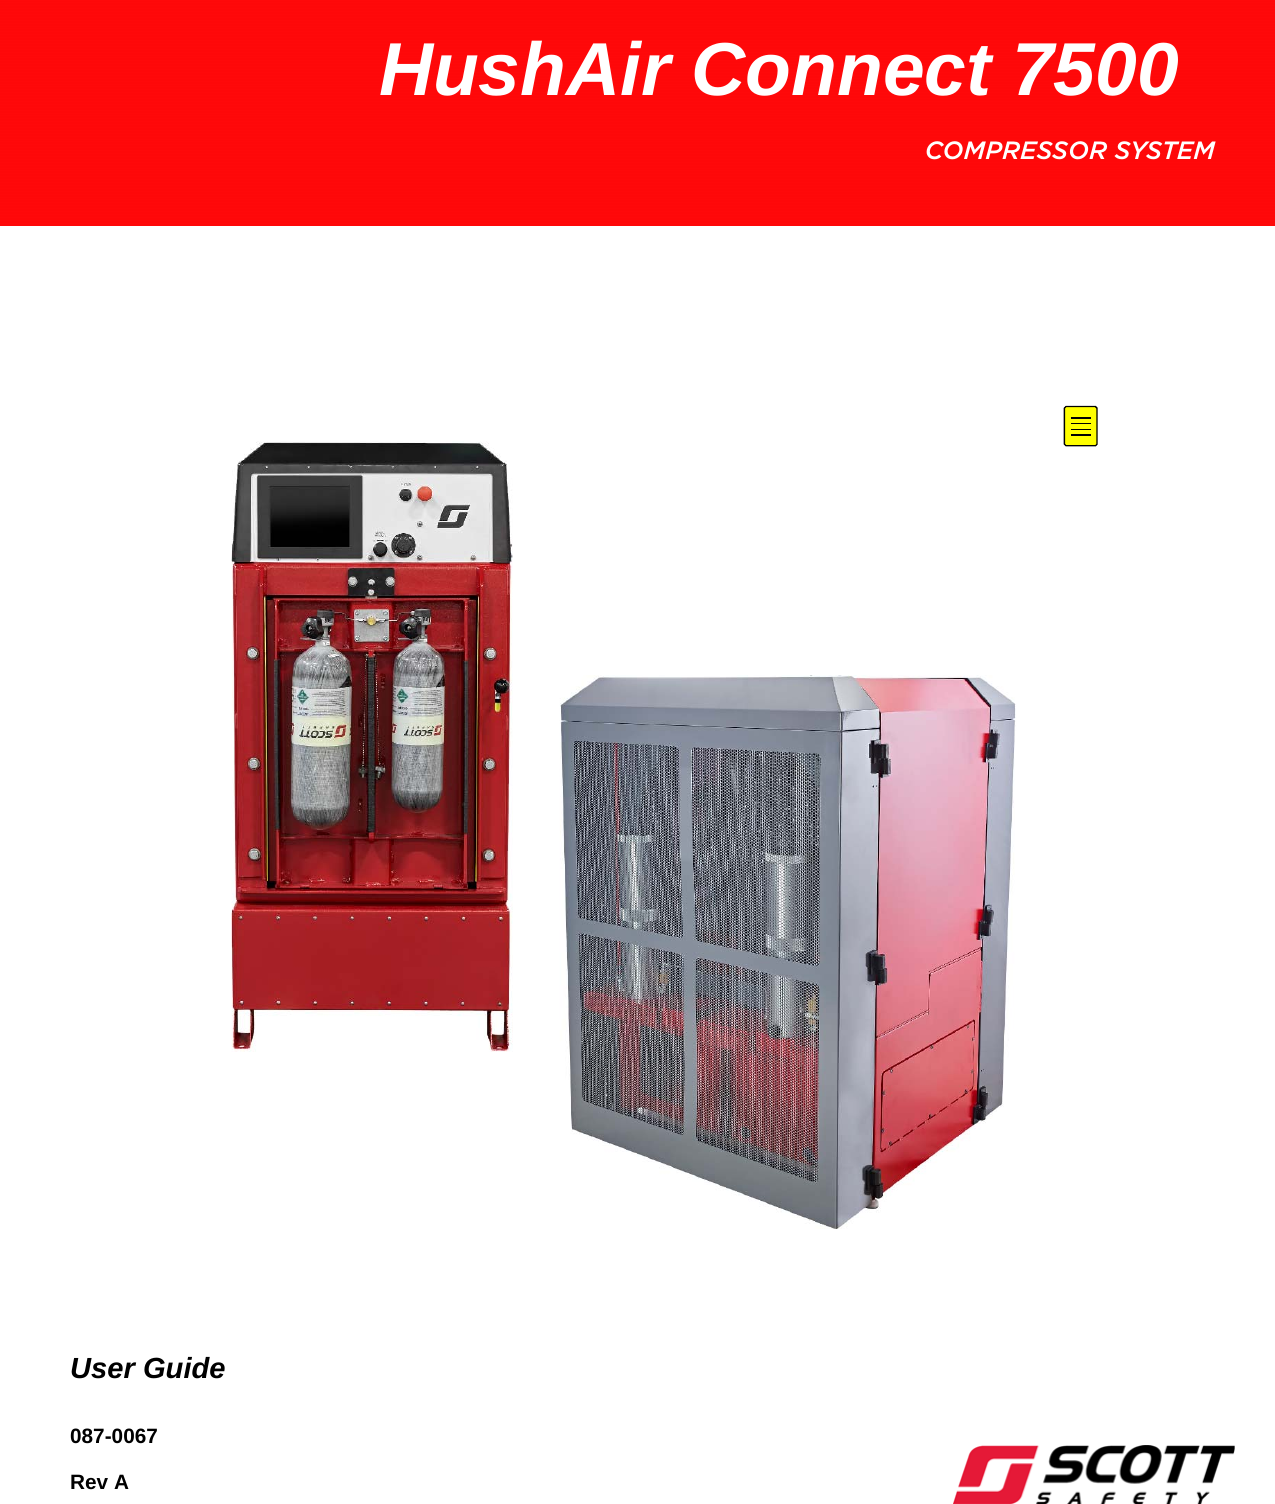 User Guide087-0067 Rev AHushAir Connect 7500COMPRESSOR SYSTEM